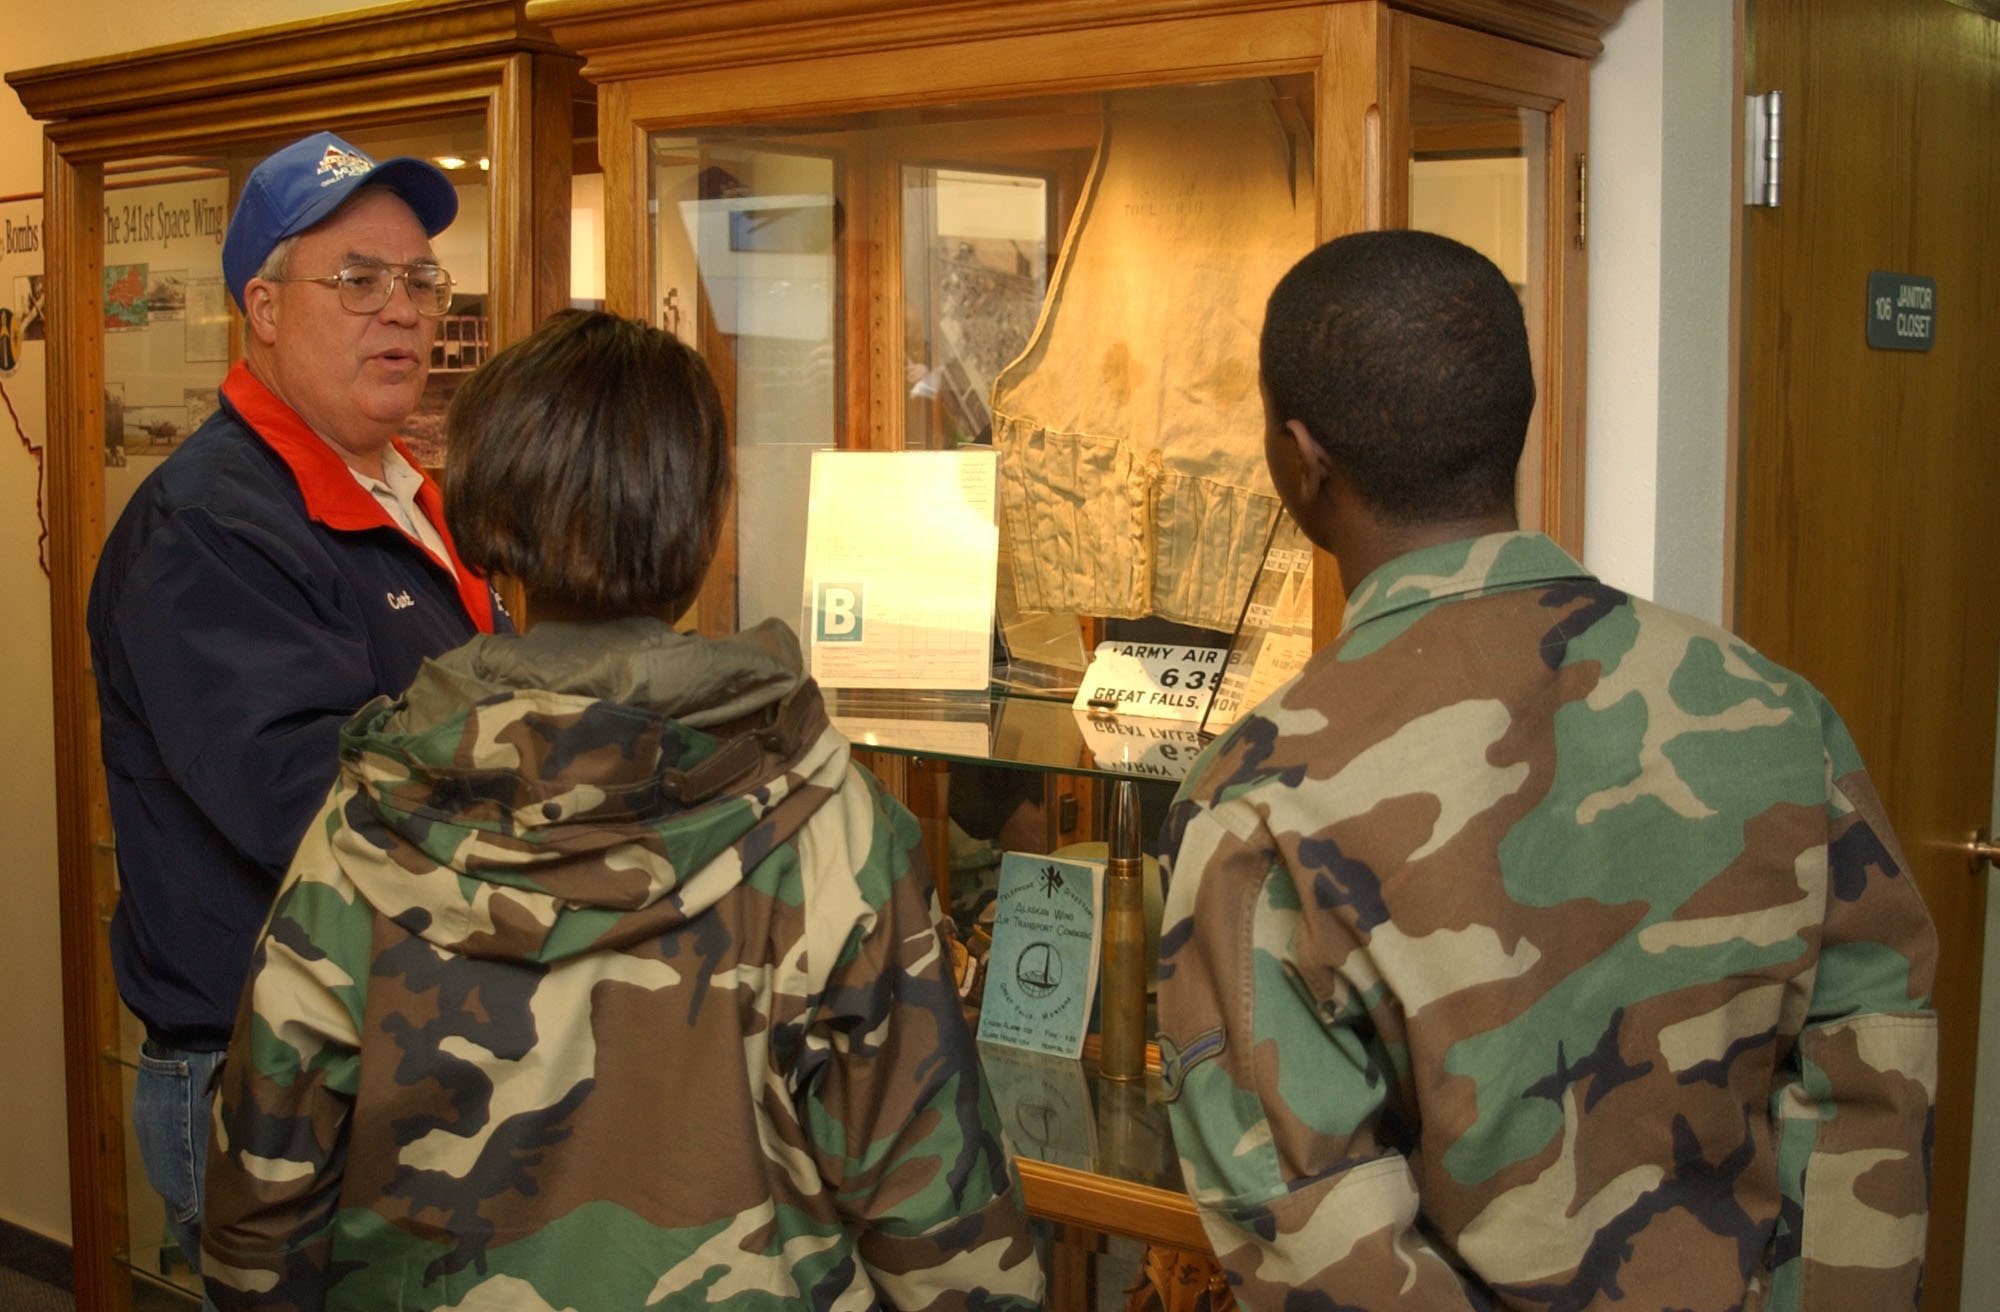 Curt Shannon, Heritage Center director, describes a museum exhibit to Airman Aaron Hollins and Airman 1st Class Lakendra Peacock, 741st Missile Security Forces Squadron members, at the Malmstrom Museum. The museum is open Monday to Friday from 10 a.m. to 4 p.m. (U.S. Air Force photo/Airman 1st Class Dillon White)